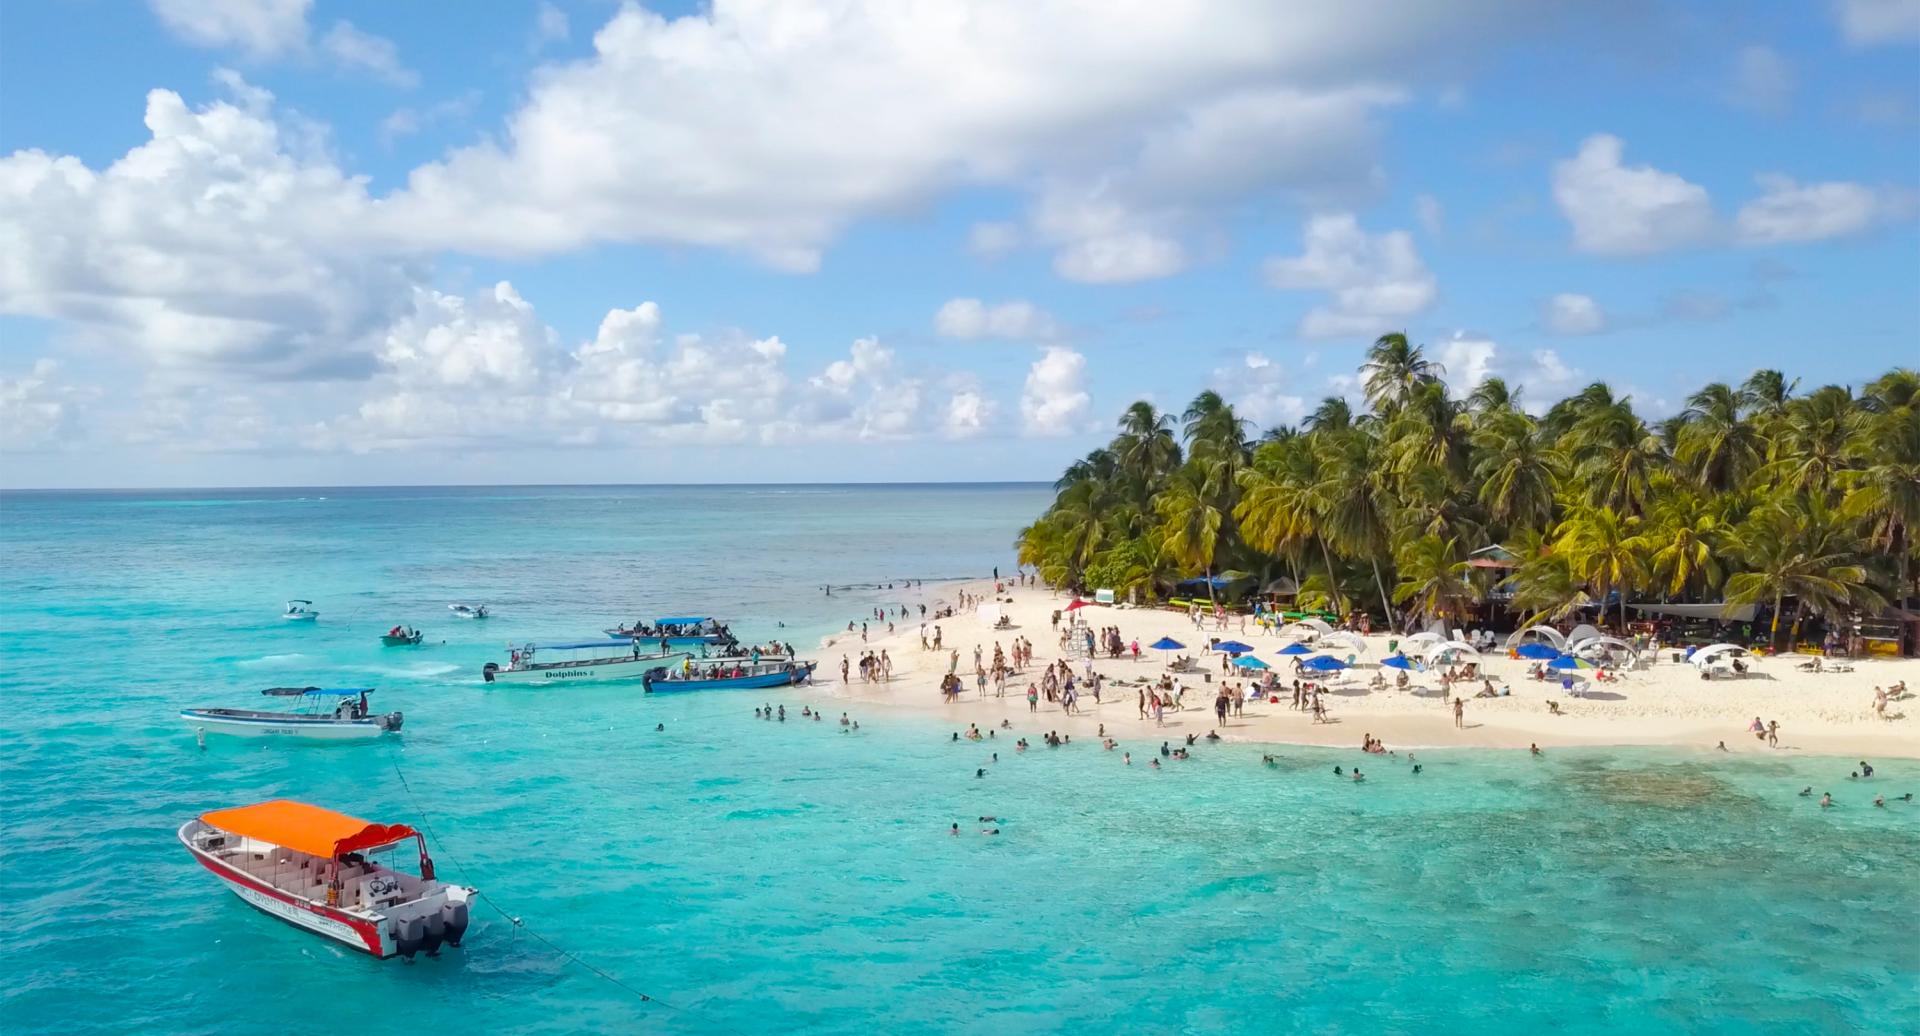 What to do on San Andrés Island?